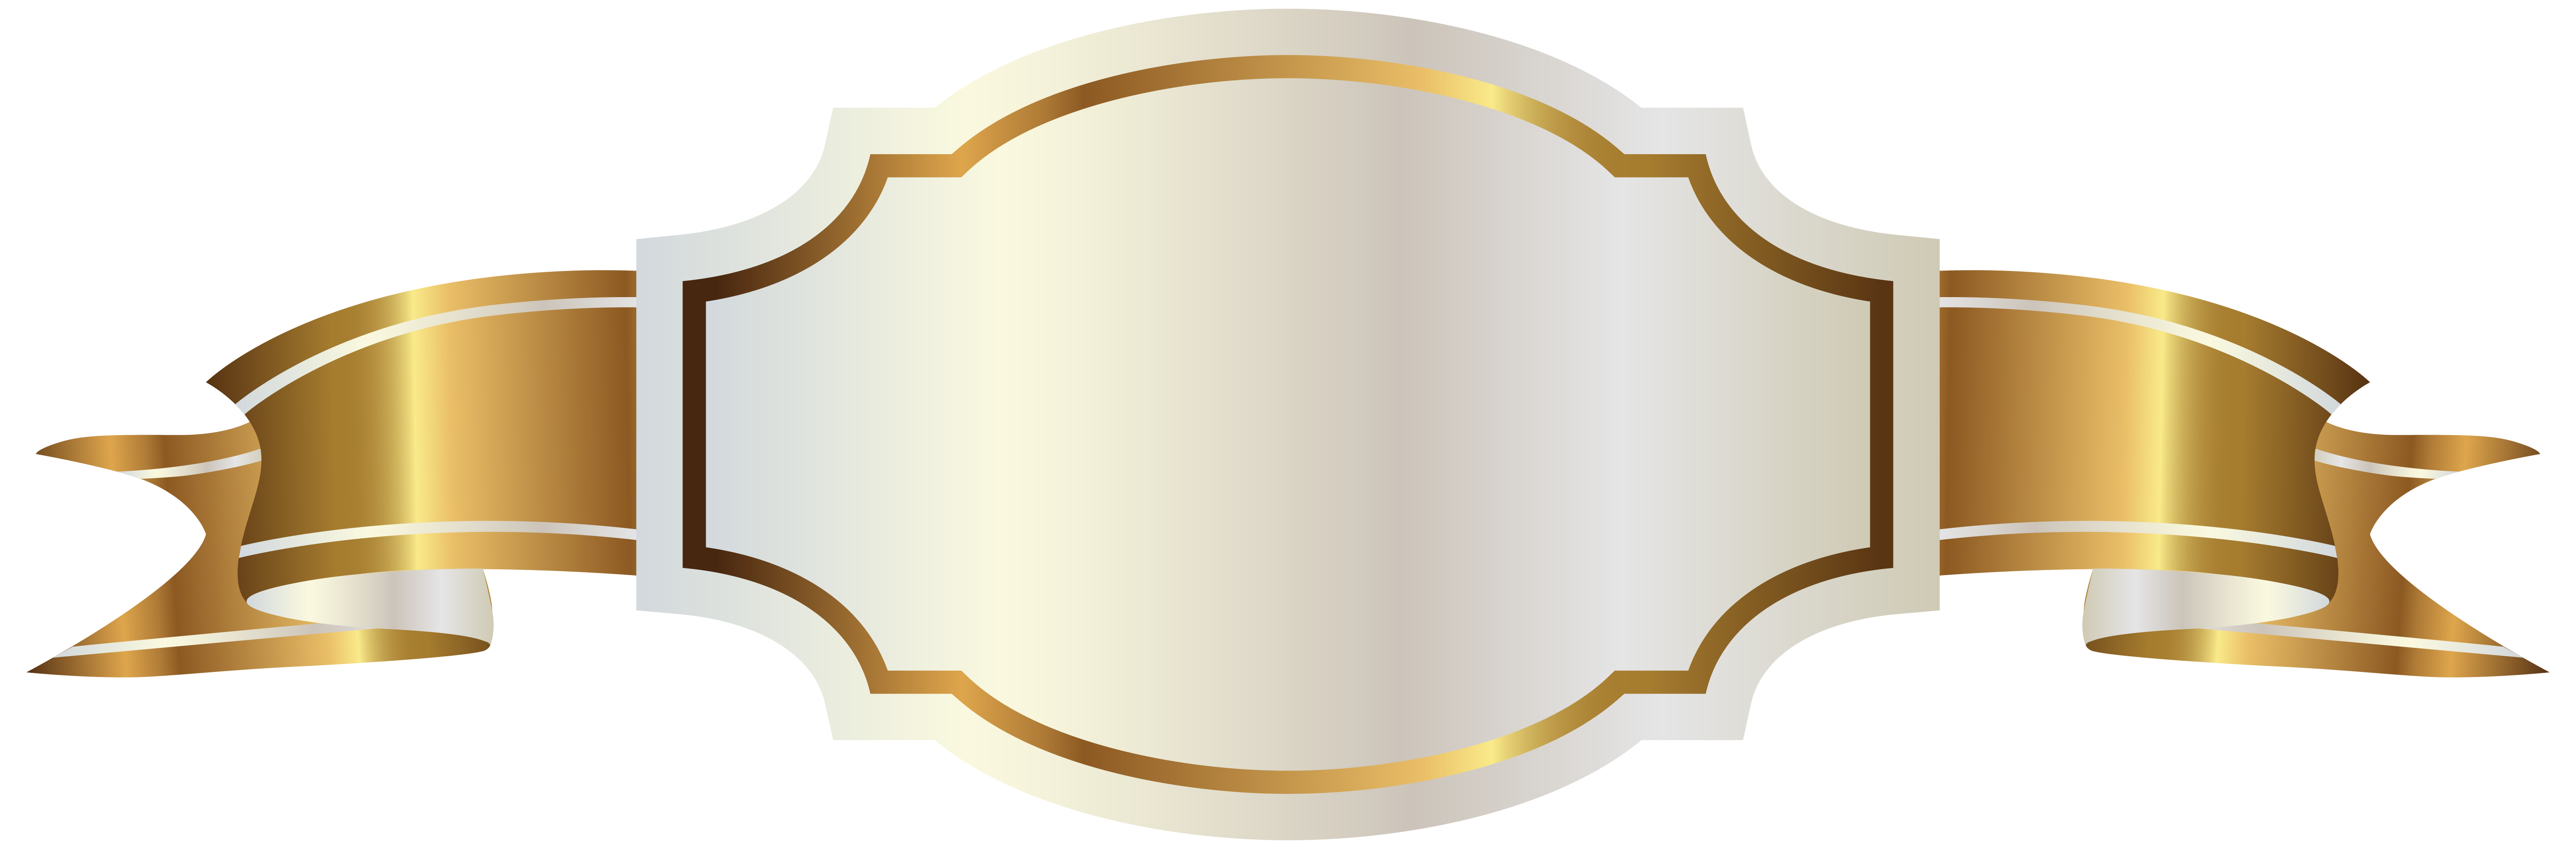 Clipart png banner. White label and gold